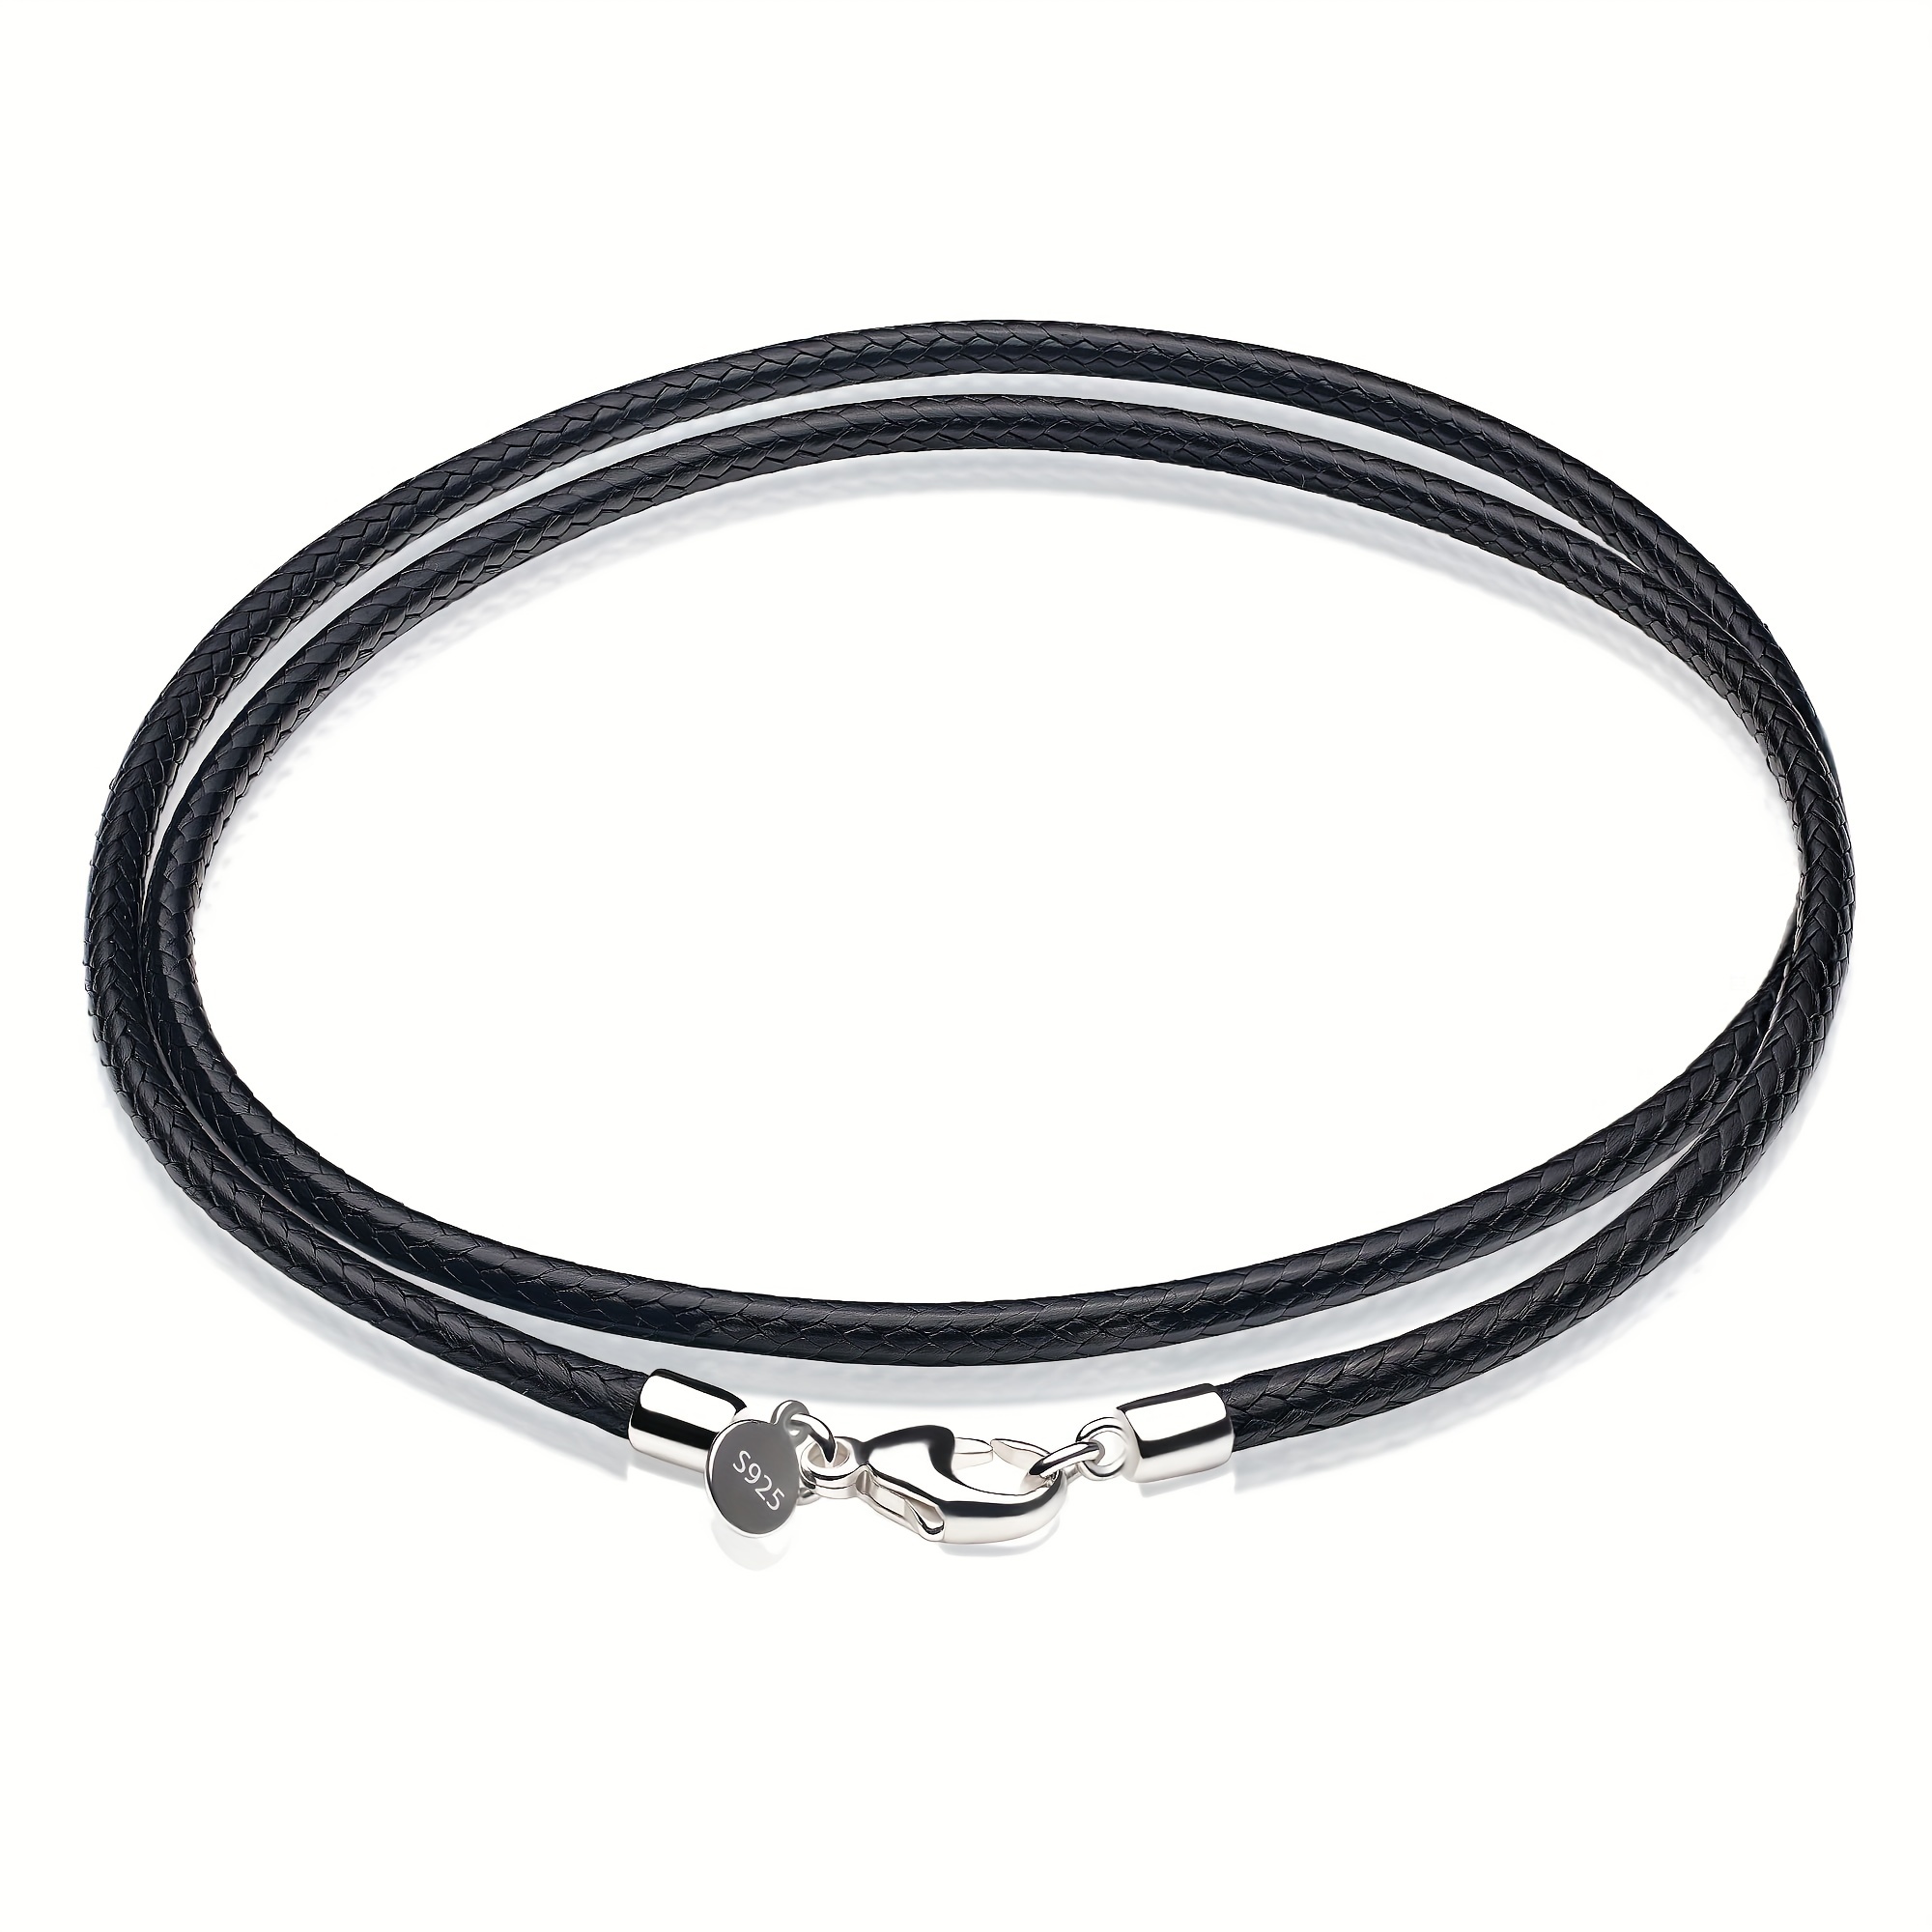 Black Leather Round Thong Cord Necklace Silver Lobster Clasp 16-36 Rope  Chain